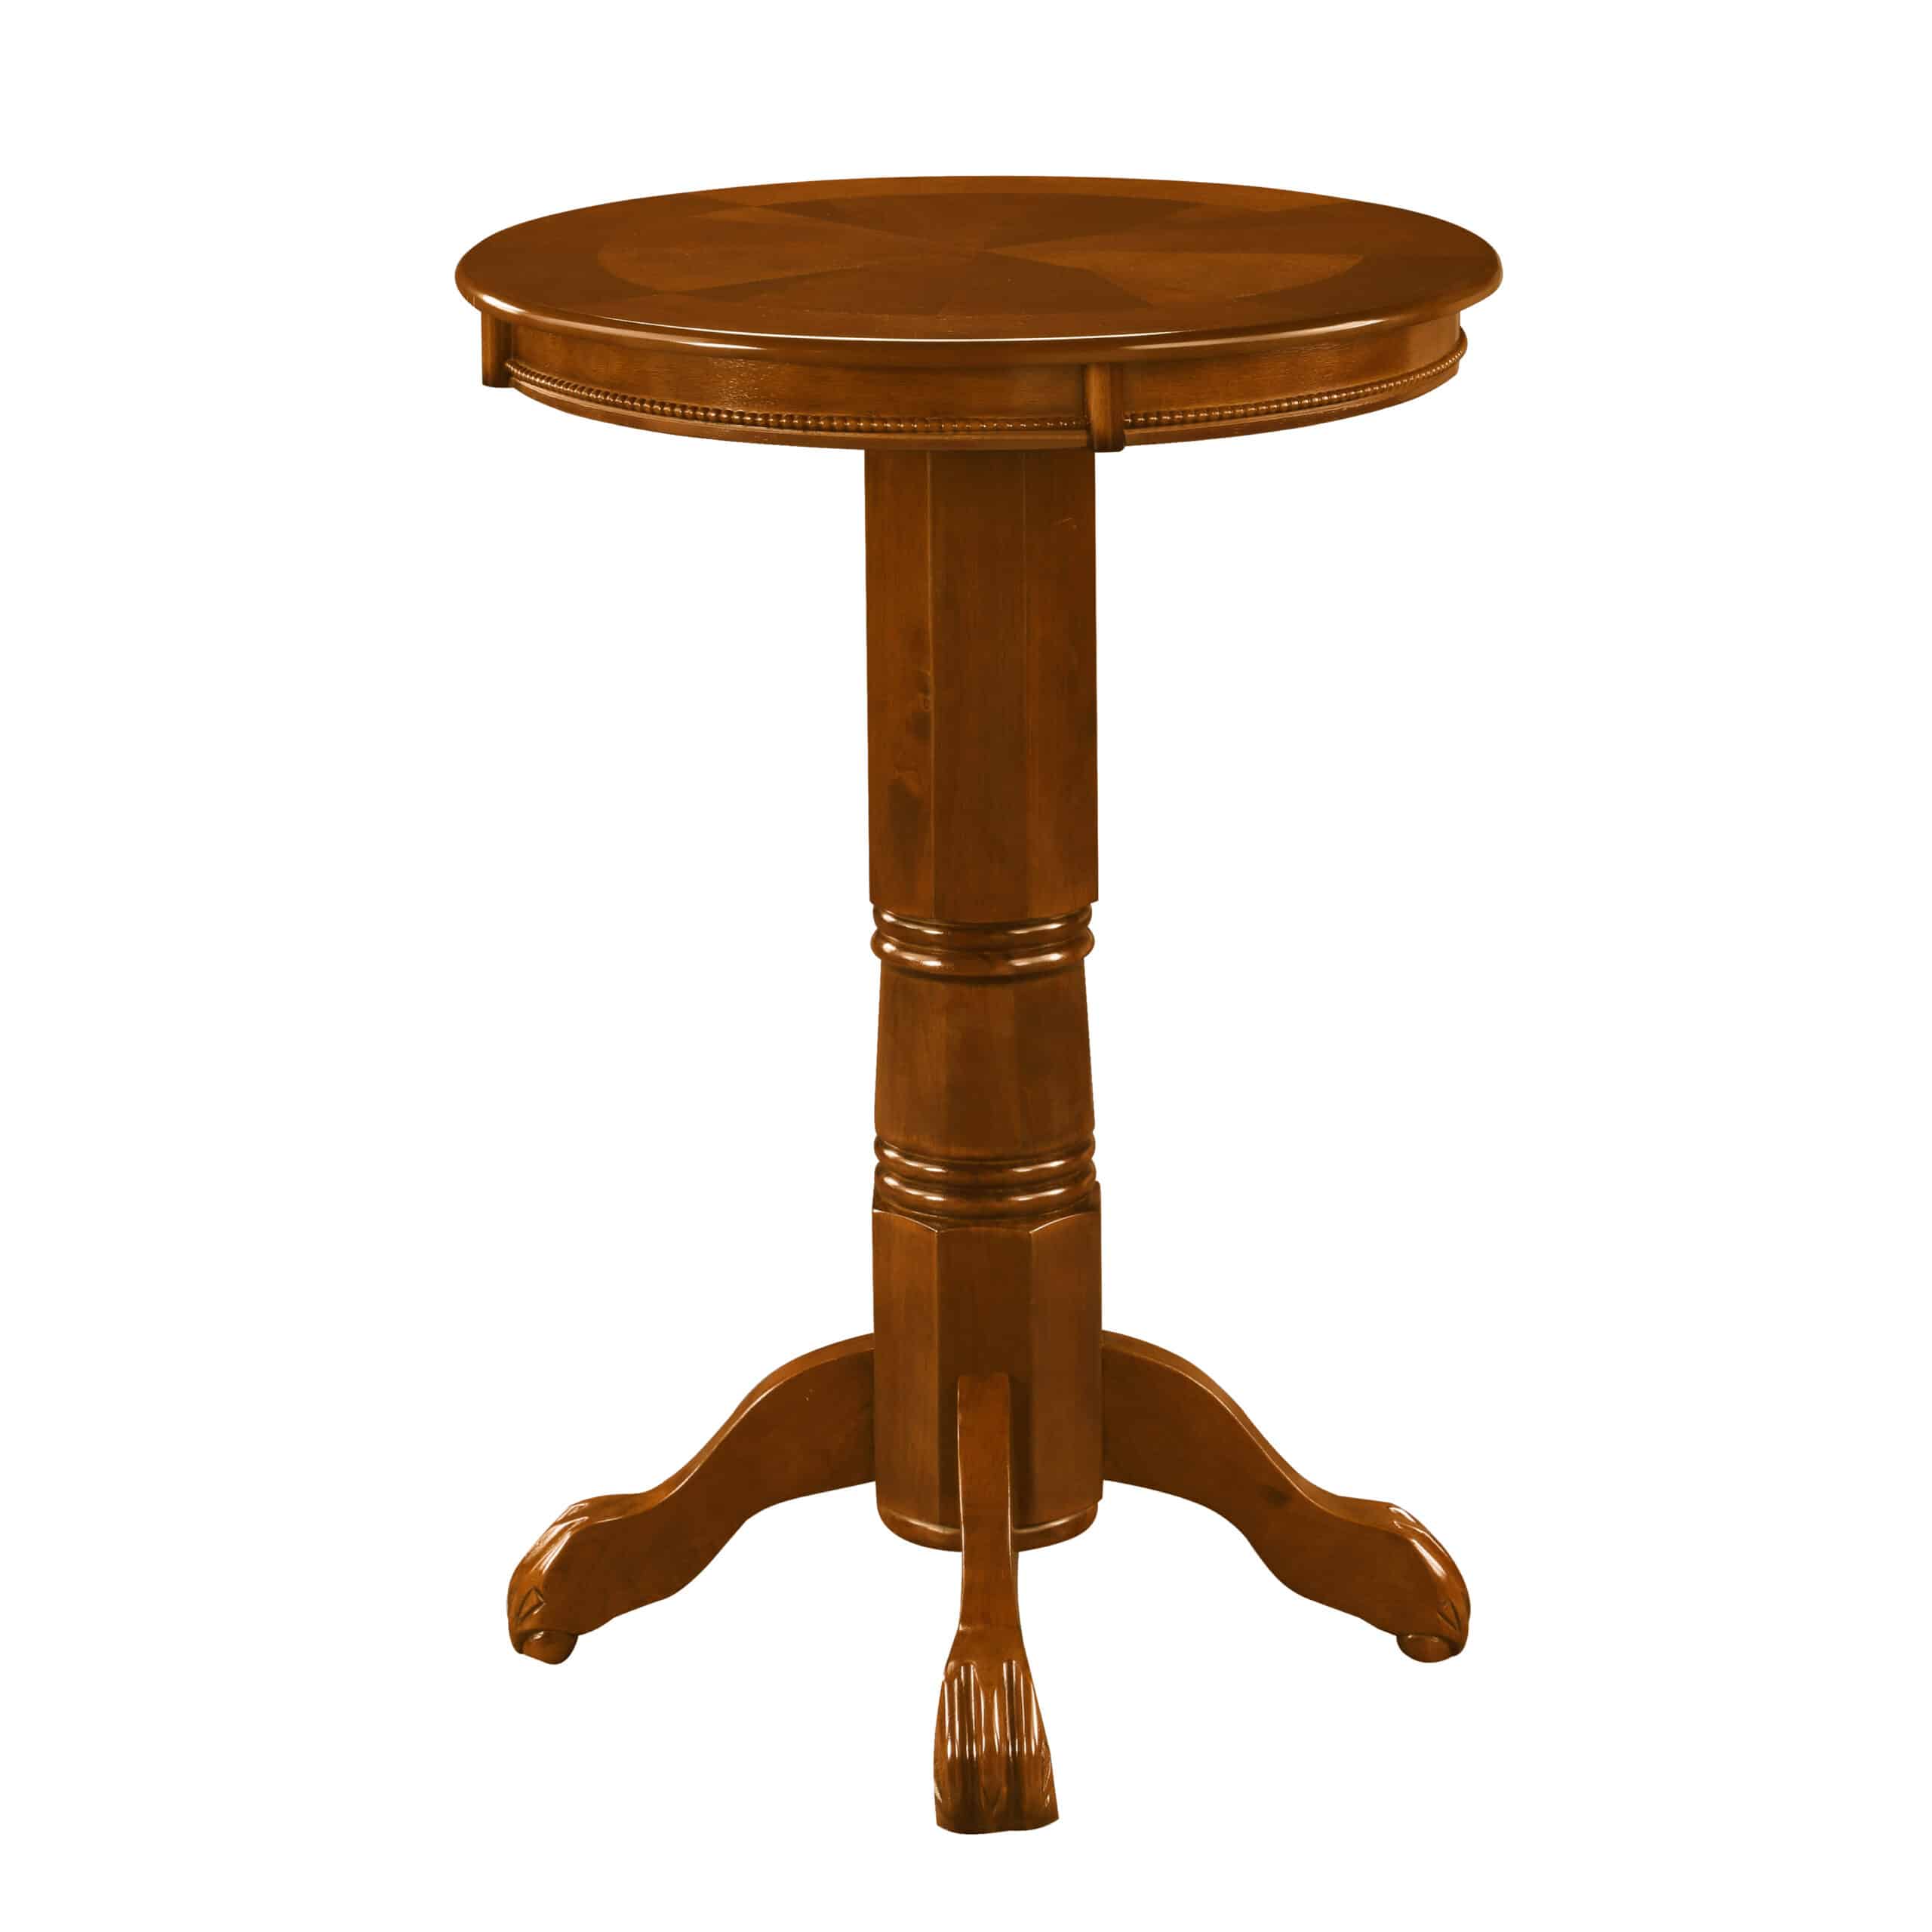 Boraam Florence 42in. Height Round Wood Pub Table - Cherry Finish - image 3 of 6